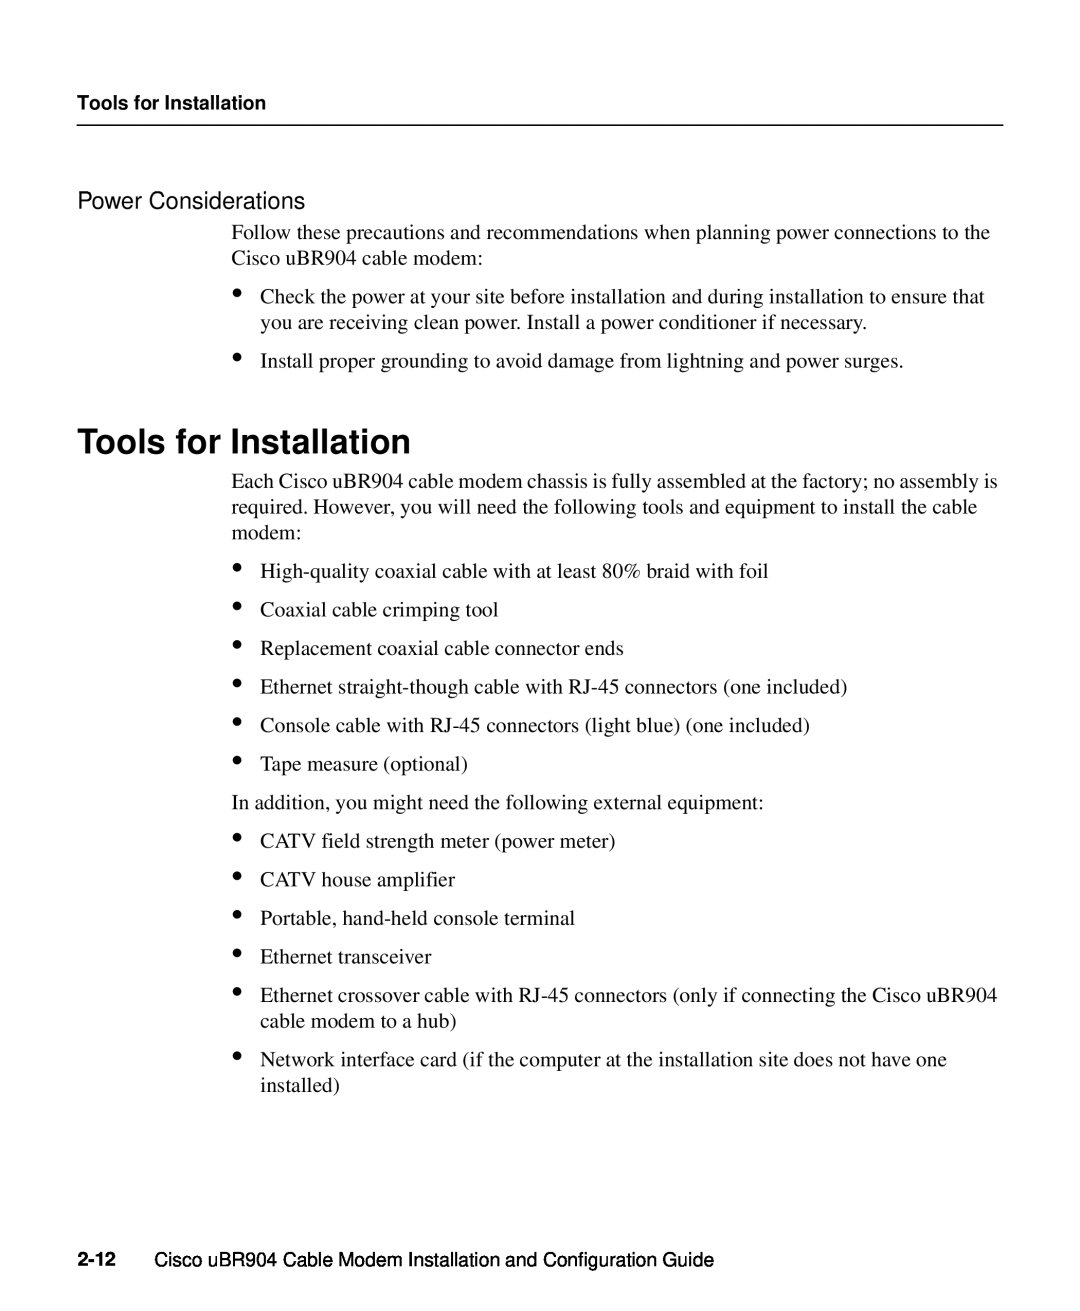 Cisco Systems UBR904 manual Tools for Installation, Power Considerations 